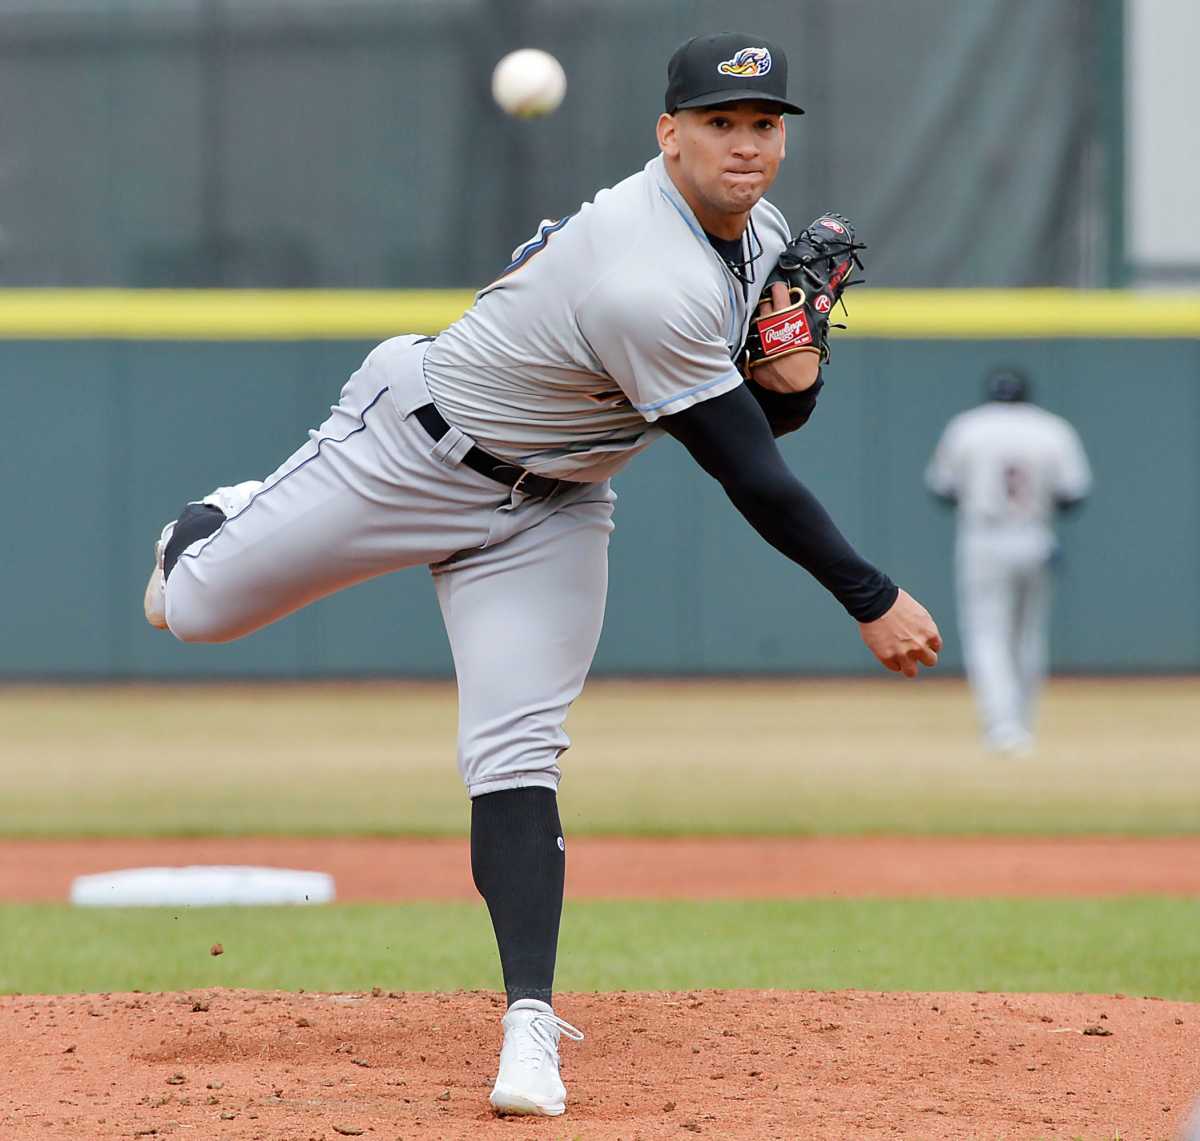 Akron RubberDucks pitcher Daniel Espino warms up between innings against the Erie SeaWolves at UPMC Park in Erie on April 9, 2022.